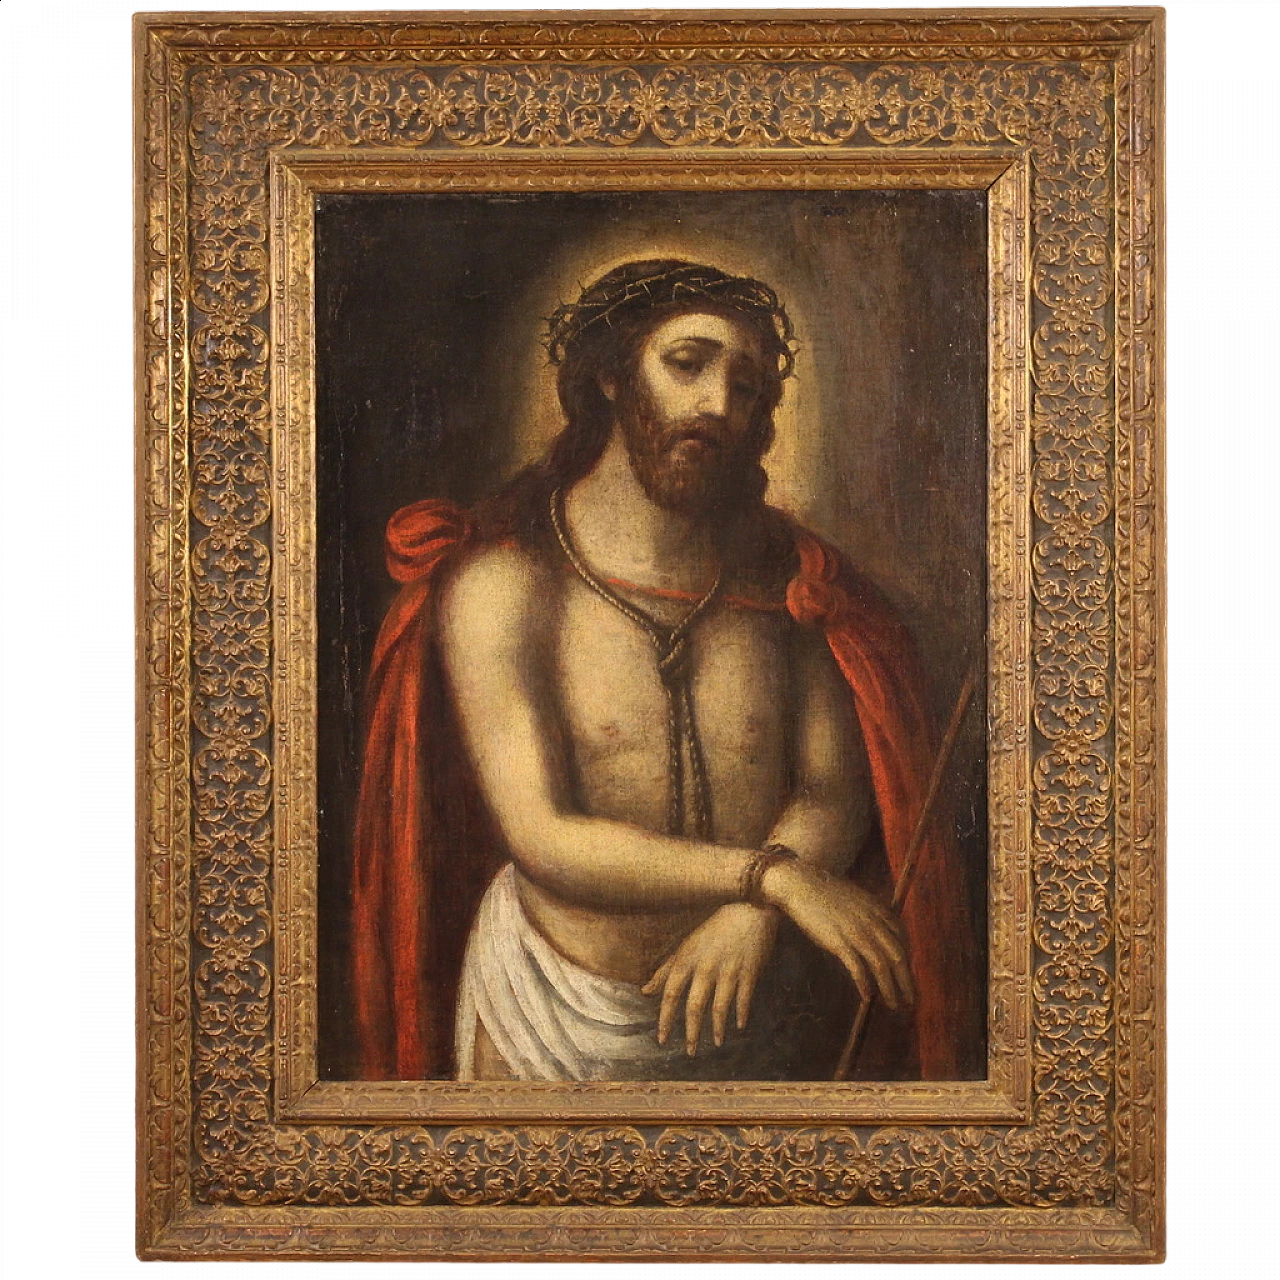 Ecce Homo painting, oil on canvas, 17th century 17